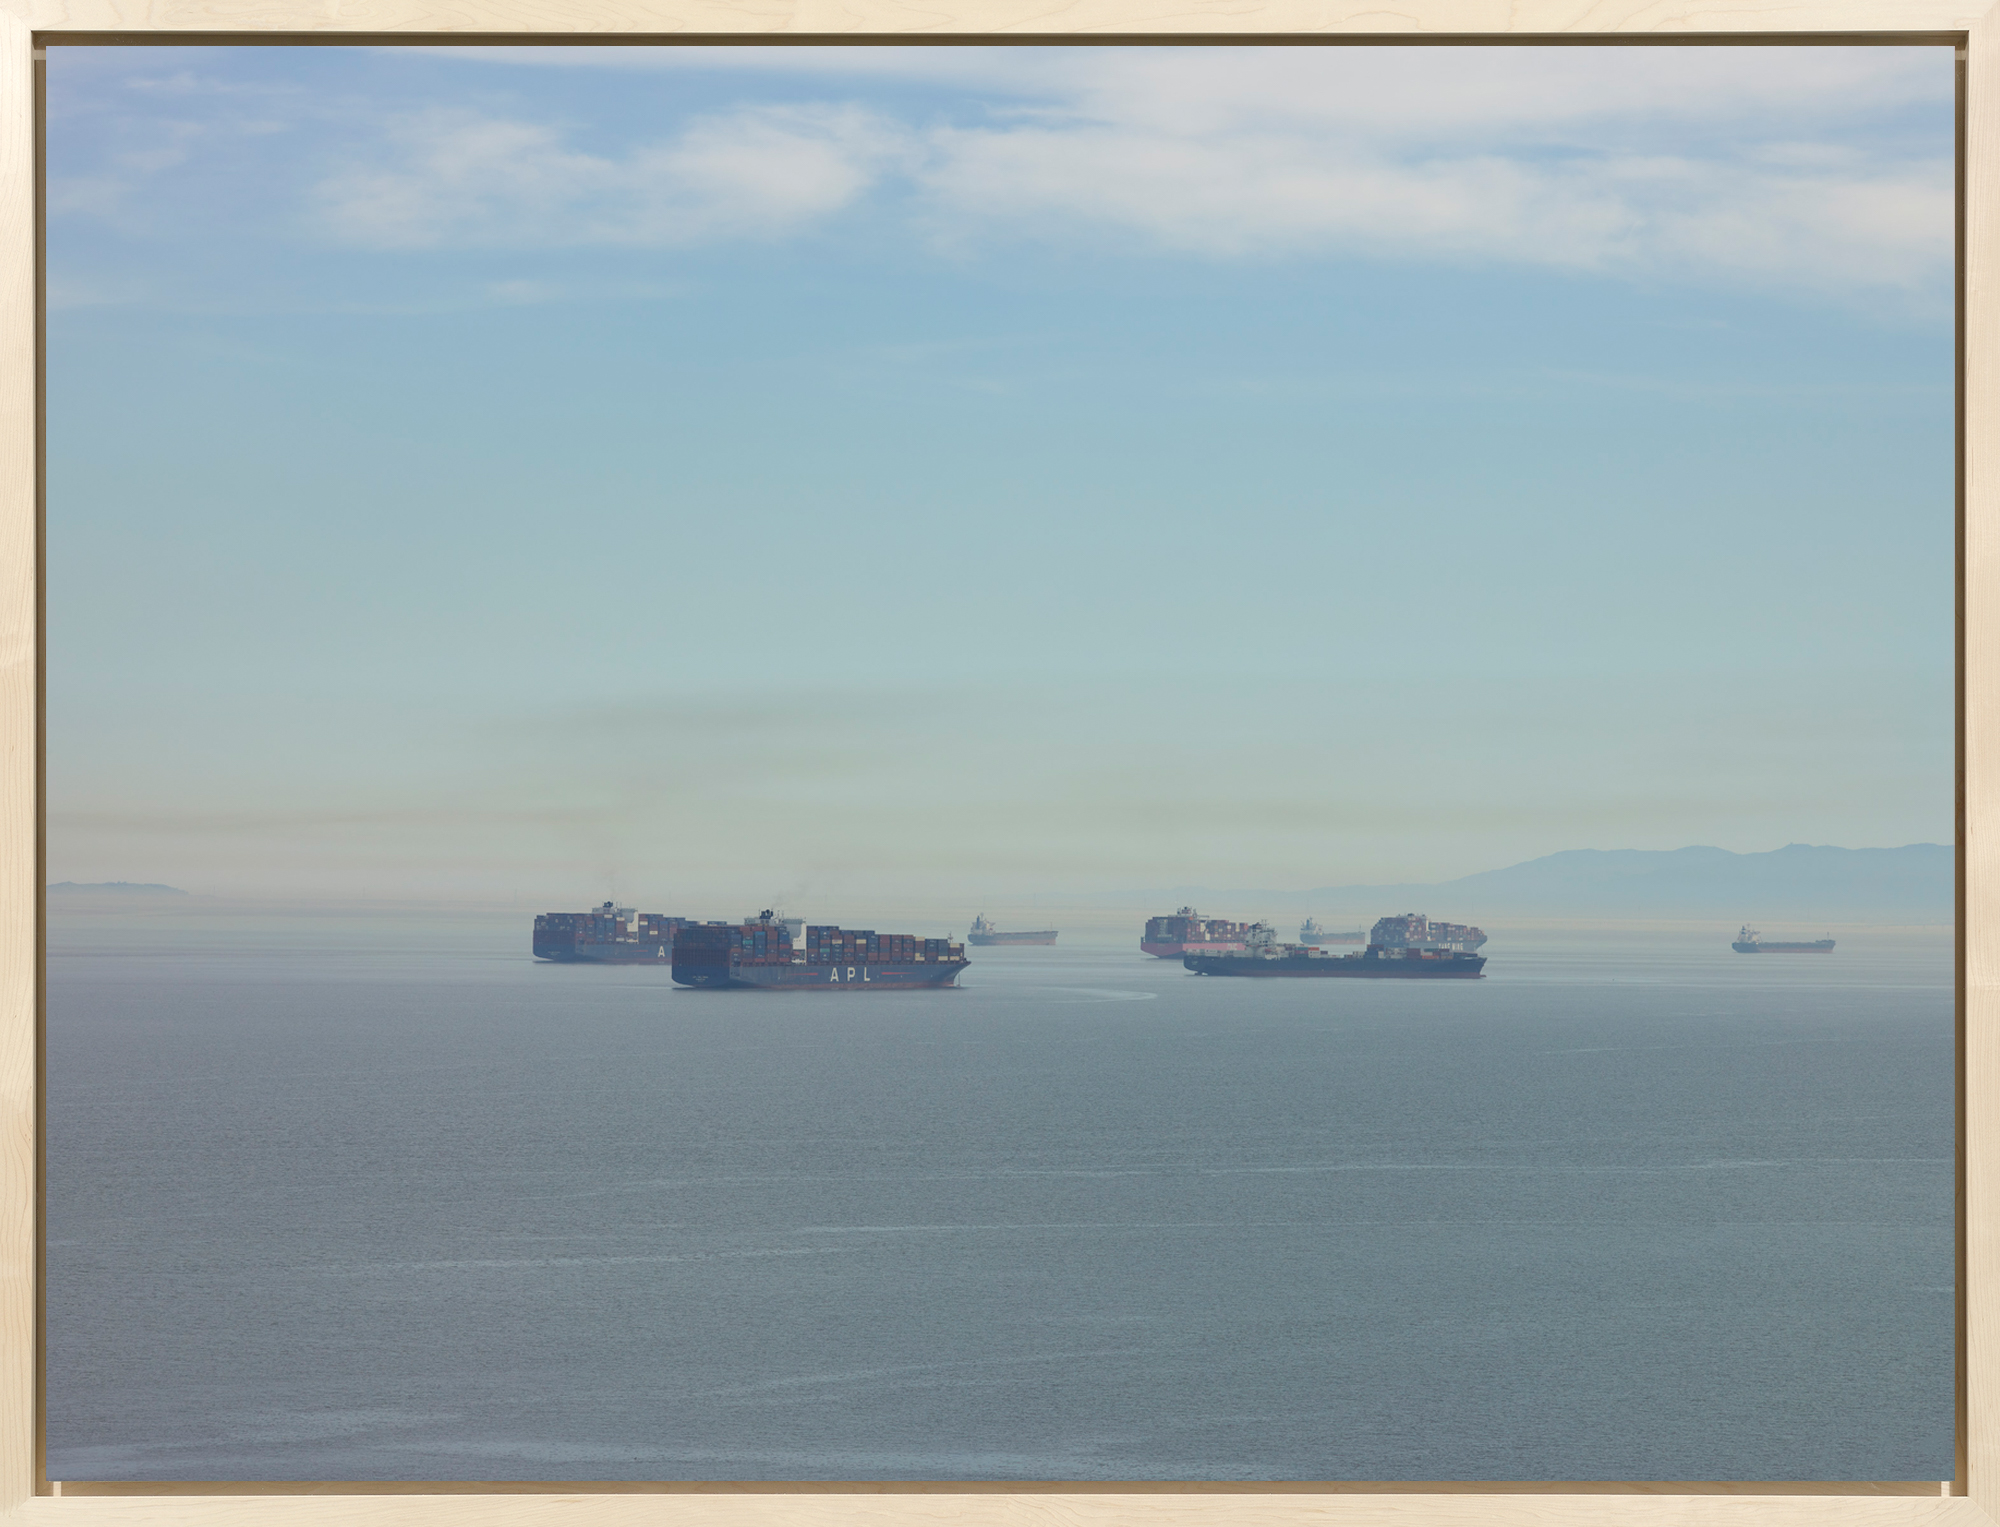 Color photograph of cargo ships on the bay during mid day framed in bleached wood